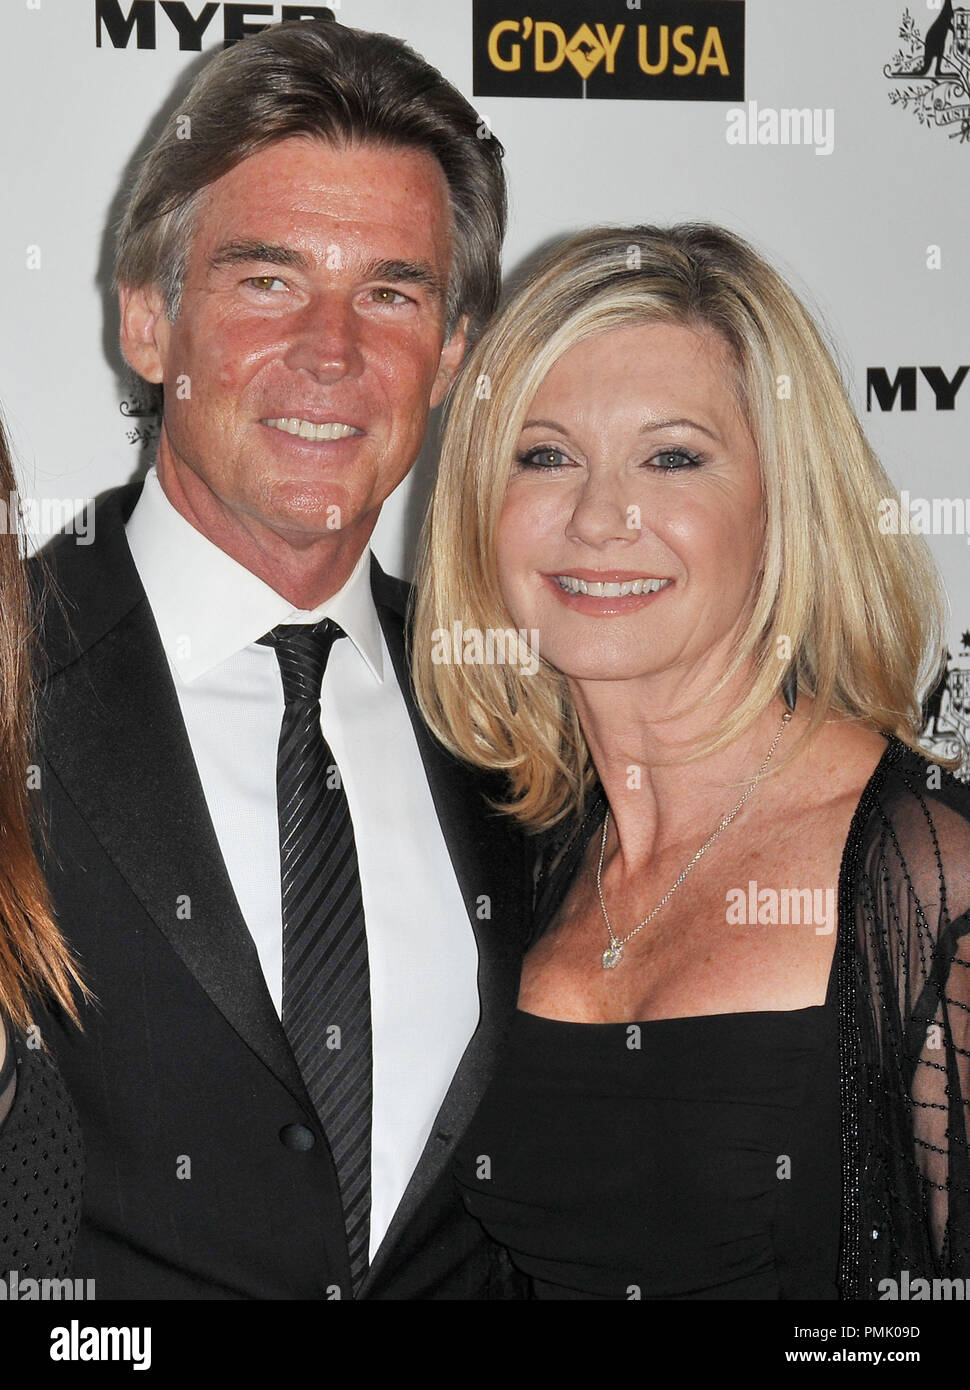 John Easterling & Olivia Newton John at the 2011 G'Day USA Los Angeles Black Tie Gala held at The Hollywood Palladium in Hollywood, CA. The event took place on Saturday, January 22, 2011. Photo by PRPP/ PictureLux Stock Photo